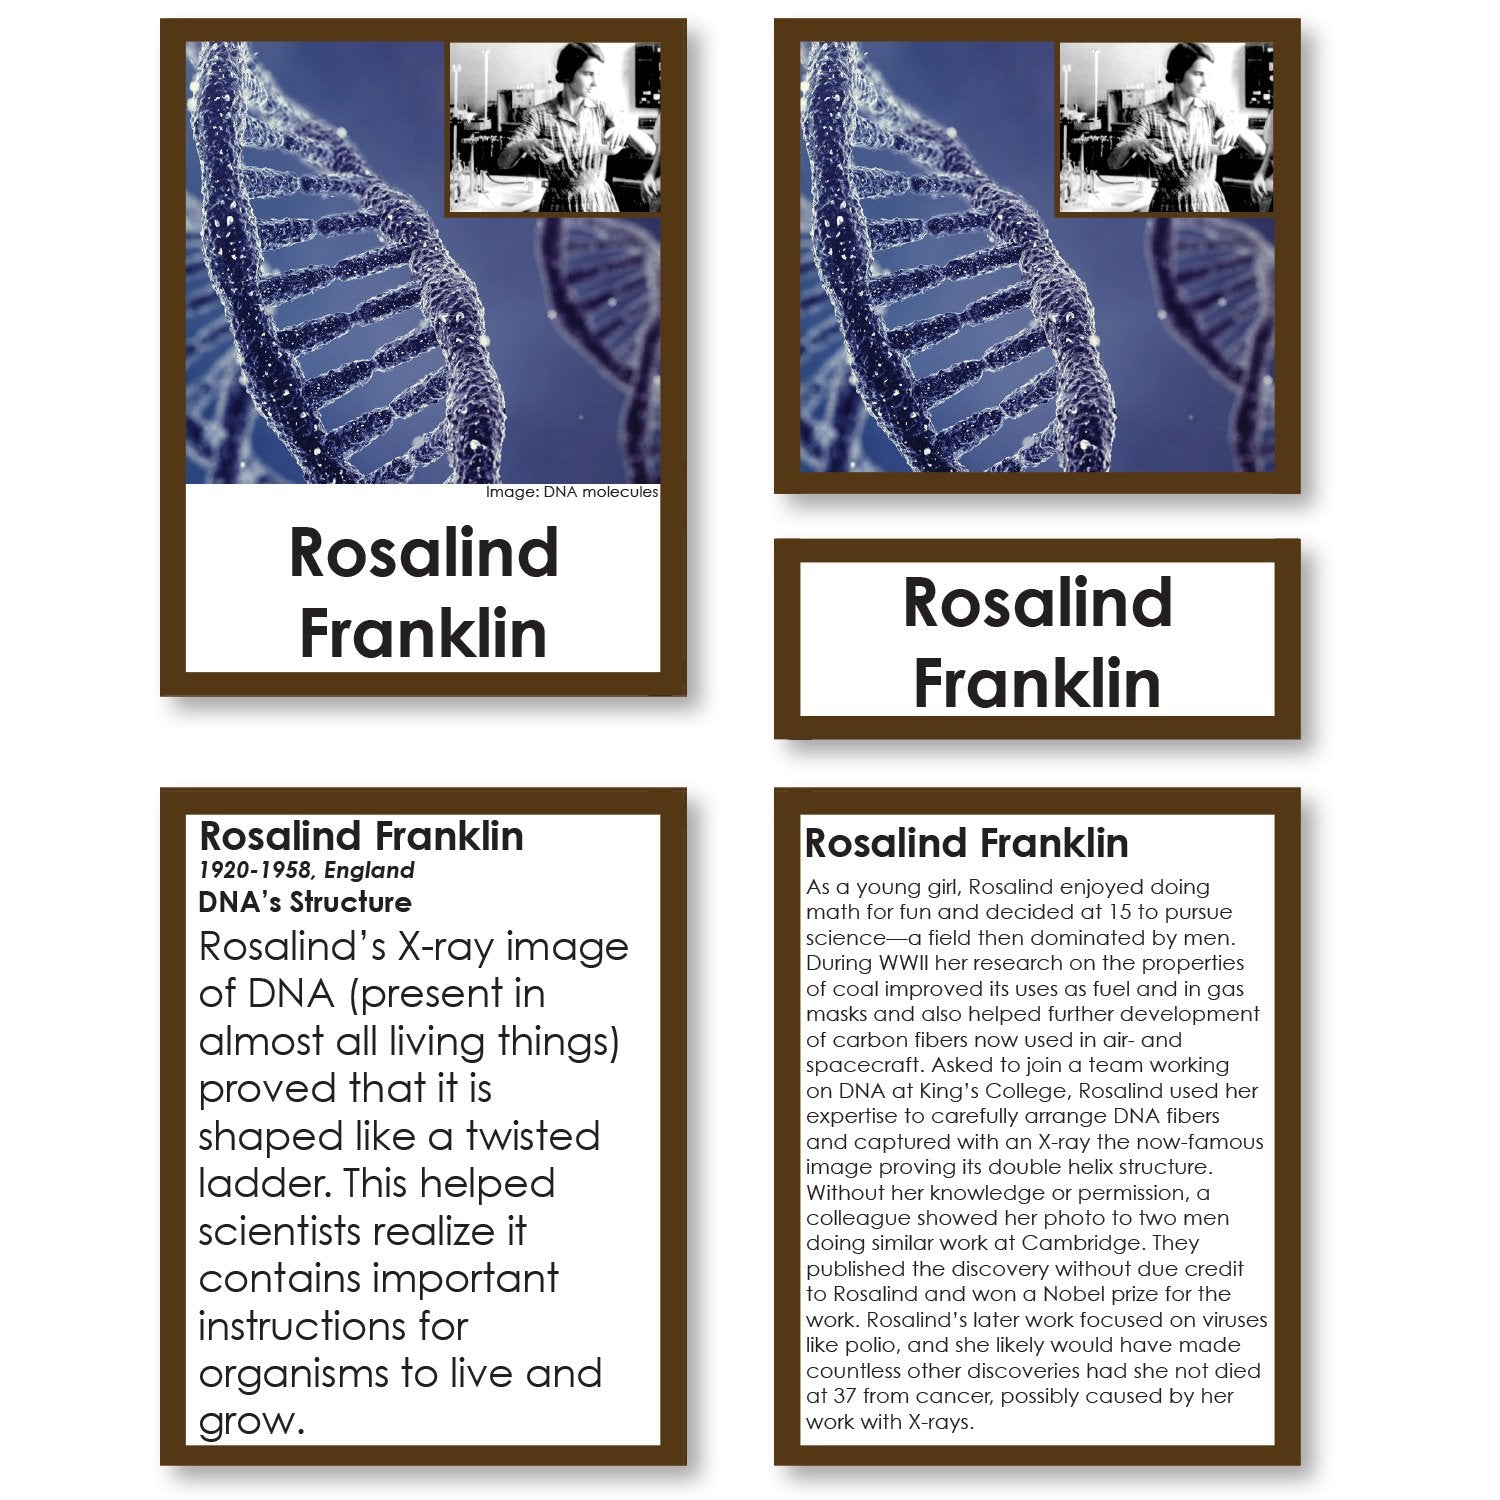 History Material-World History - Pioneering Women Of Science 3-Part Cards With Descriptions